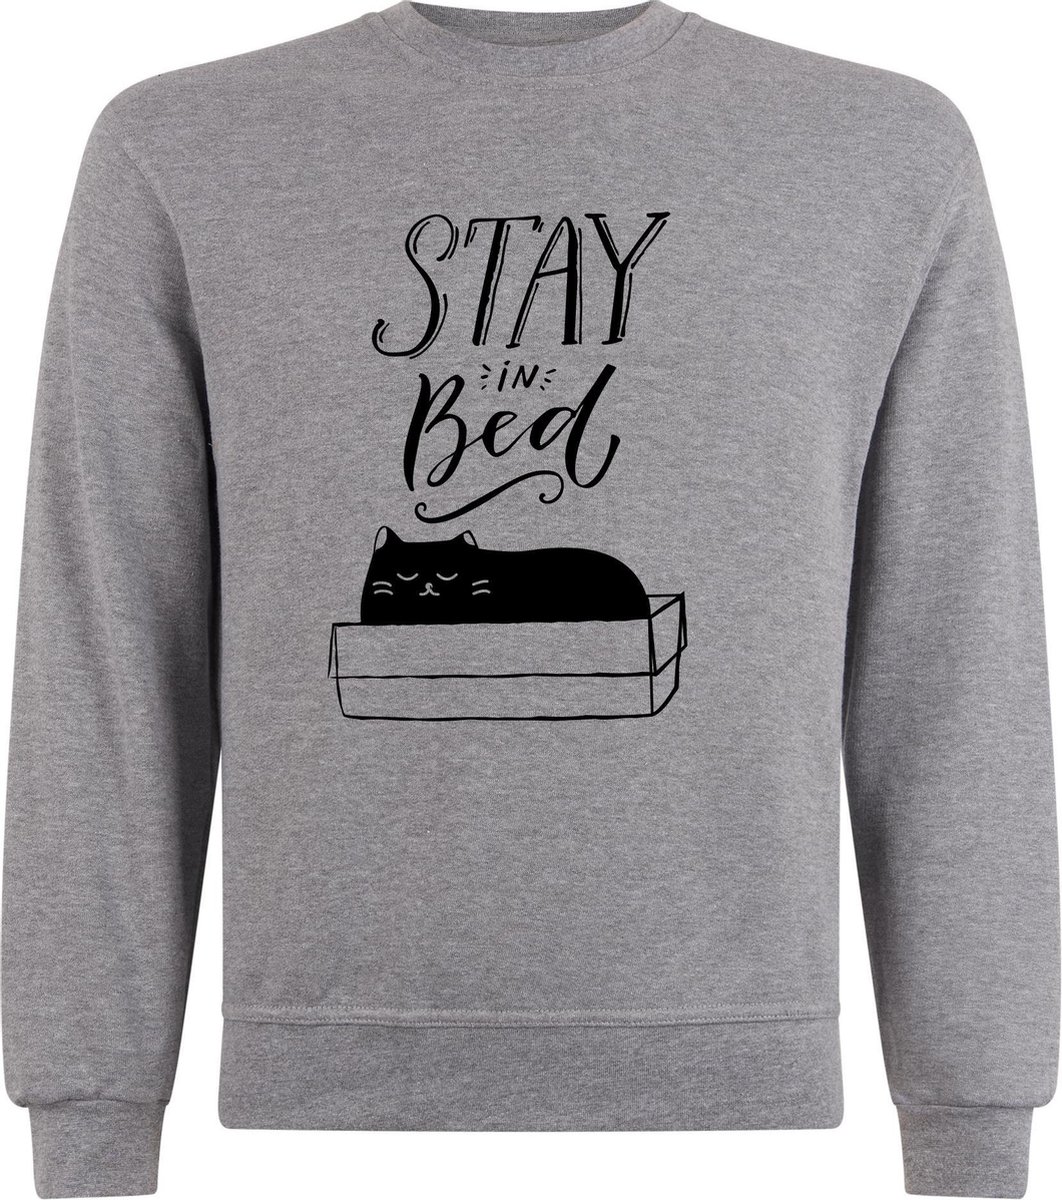 Sweater zonder capuchon - Jumper - Trui - Vest - Lifestyle sweater - Chill Sweater - Kat - Cat - Stay In Bed - S.Grey - XXL